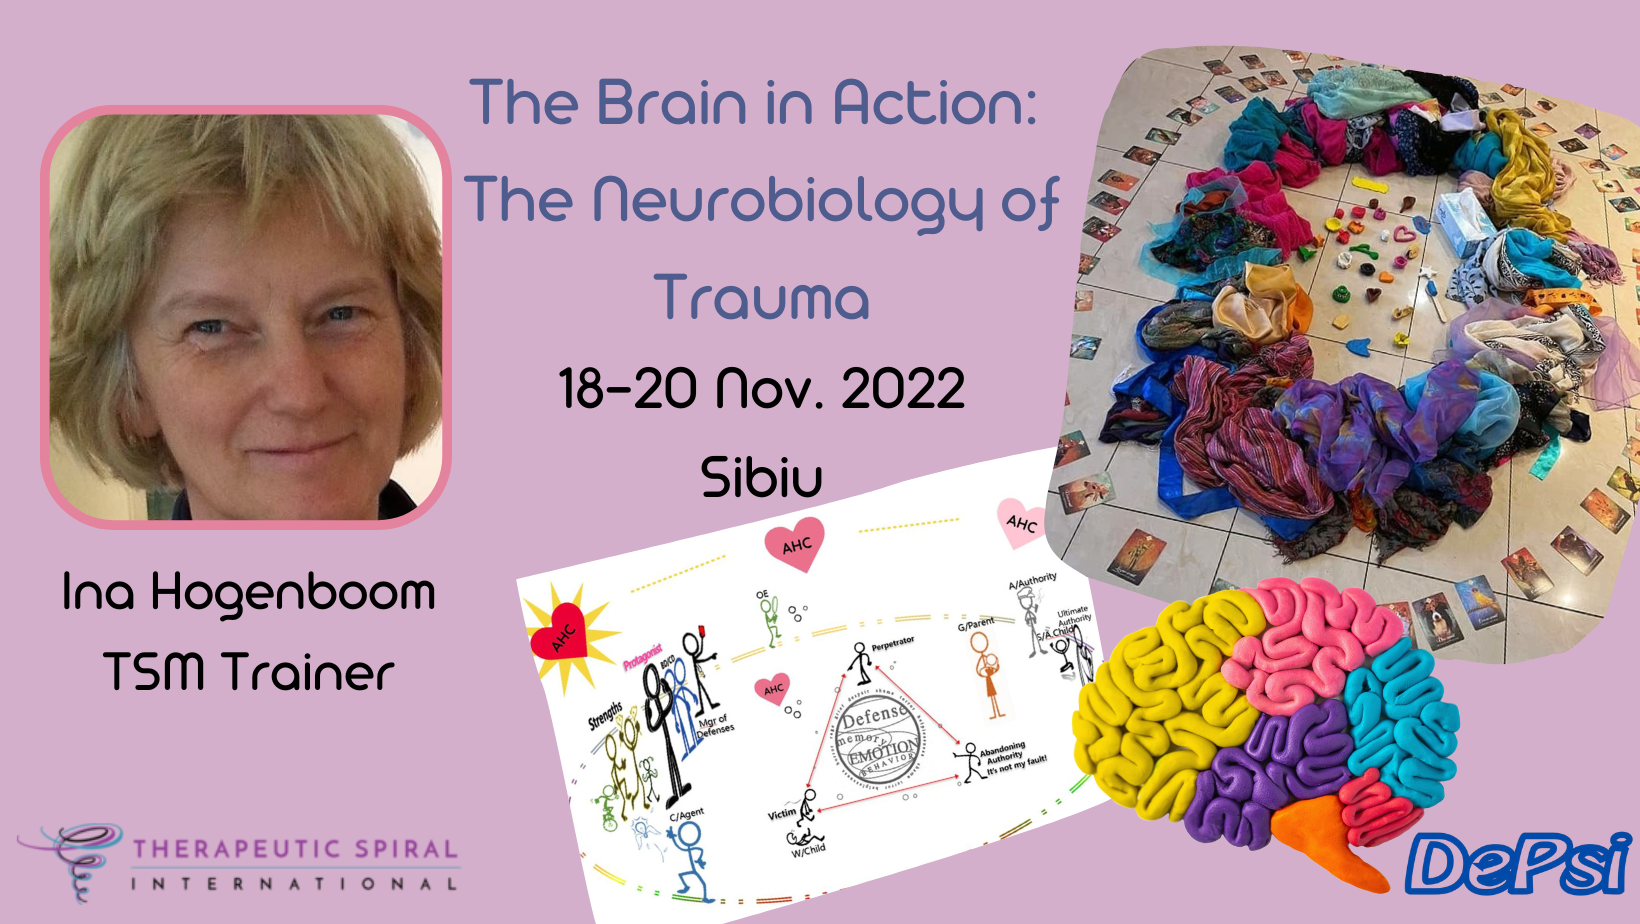 The Brain in Action: The Neurobiology of Trauma